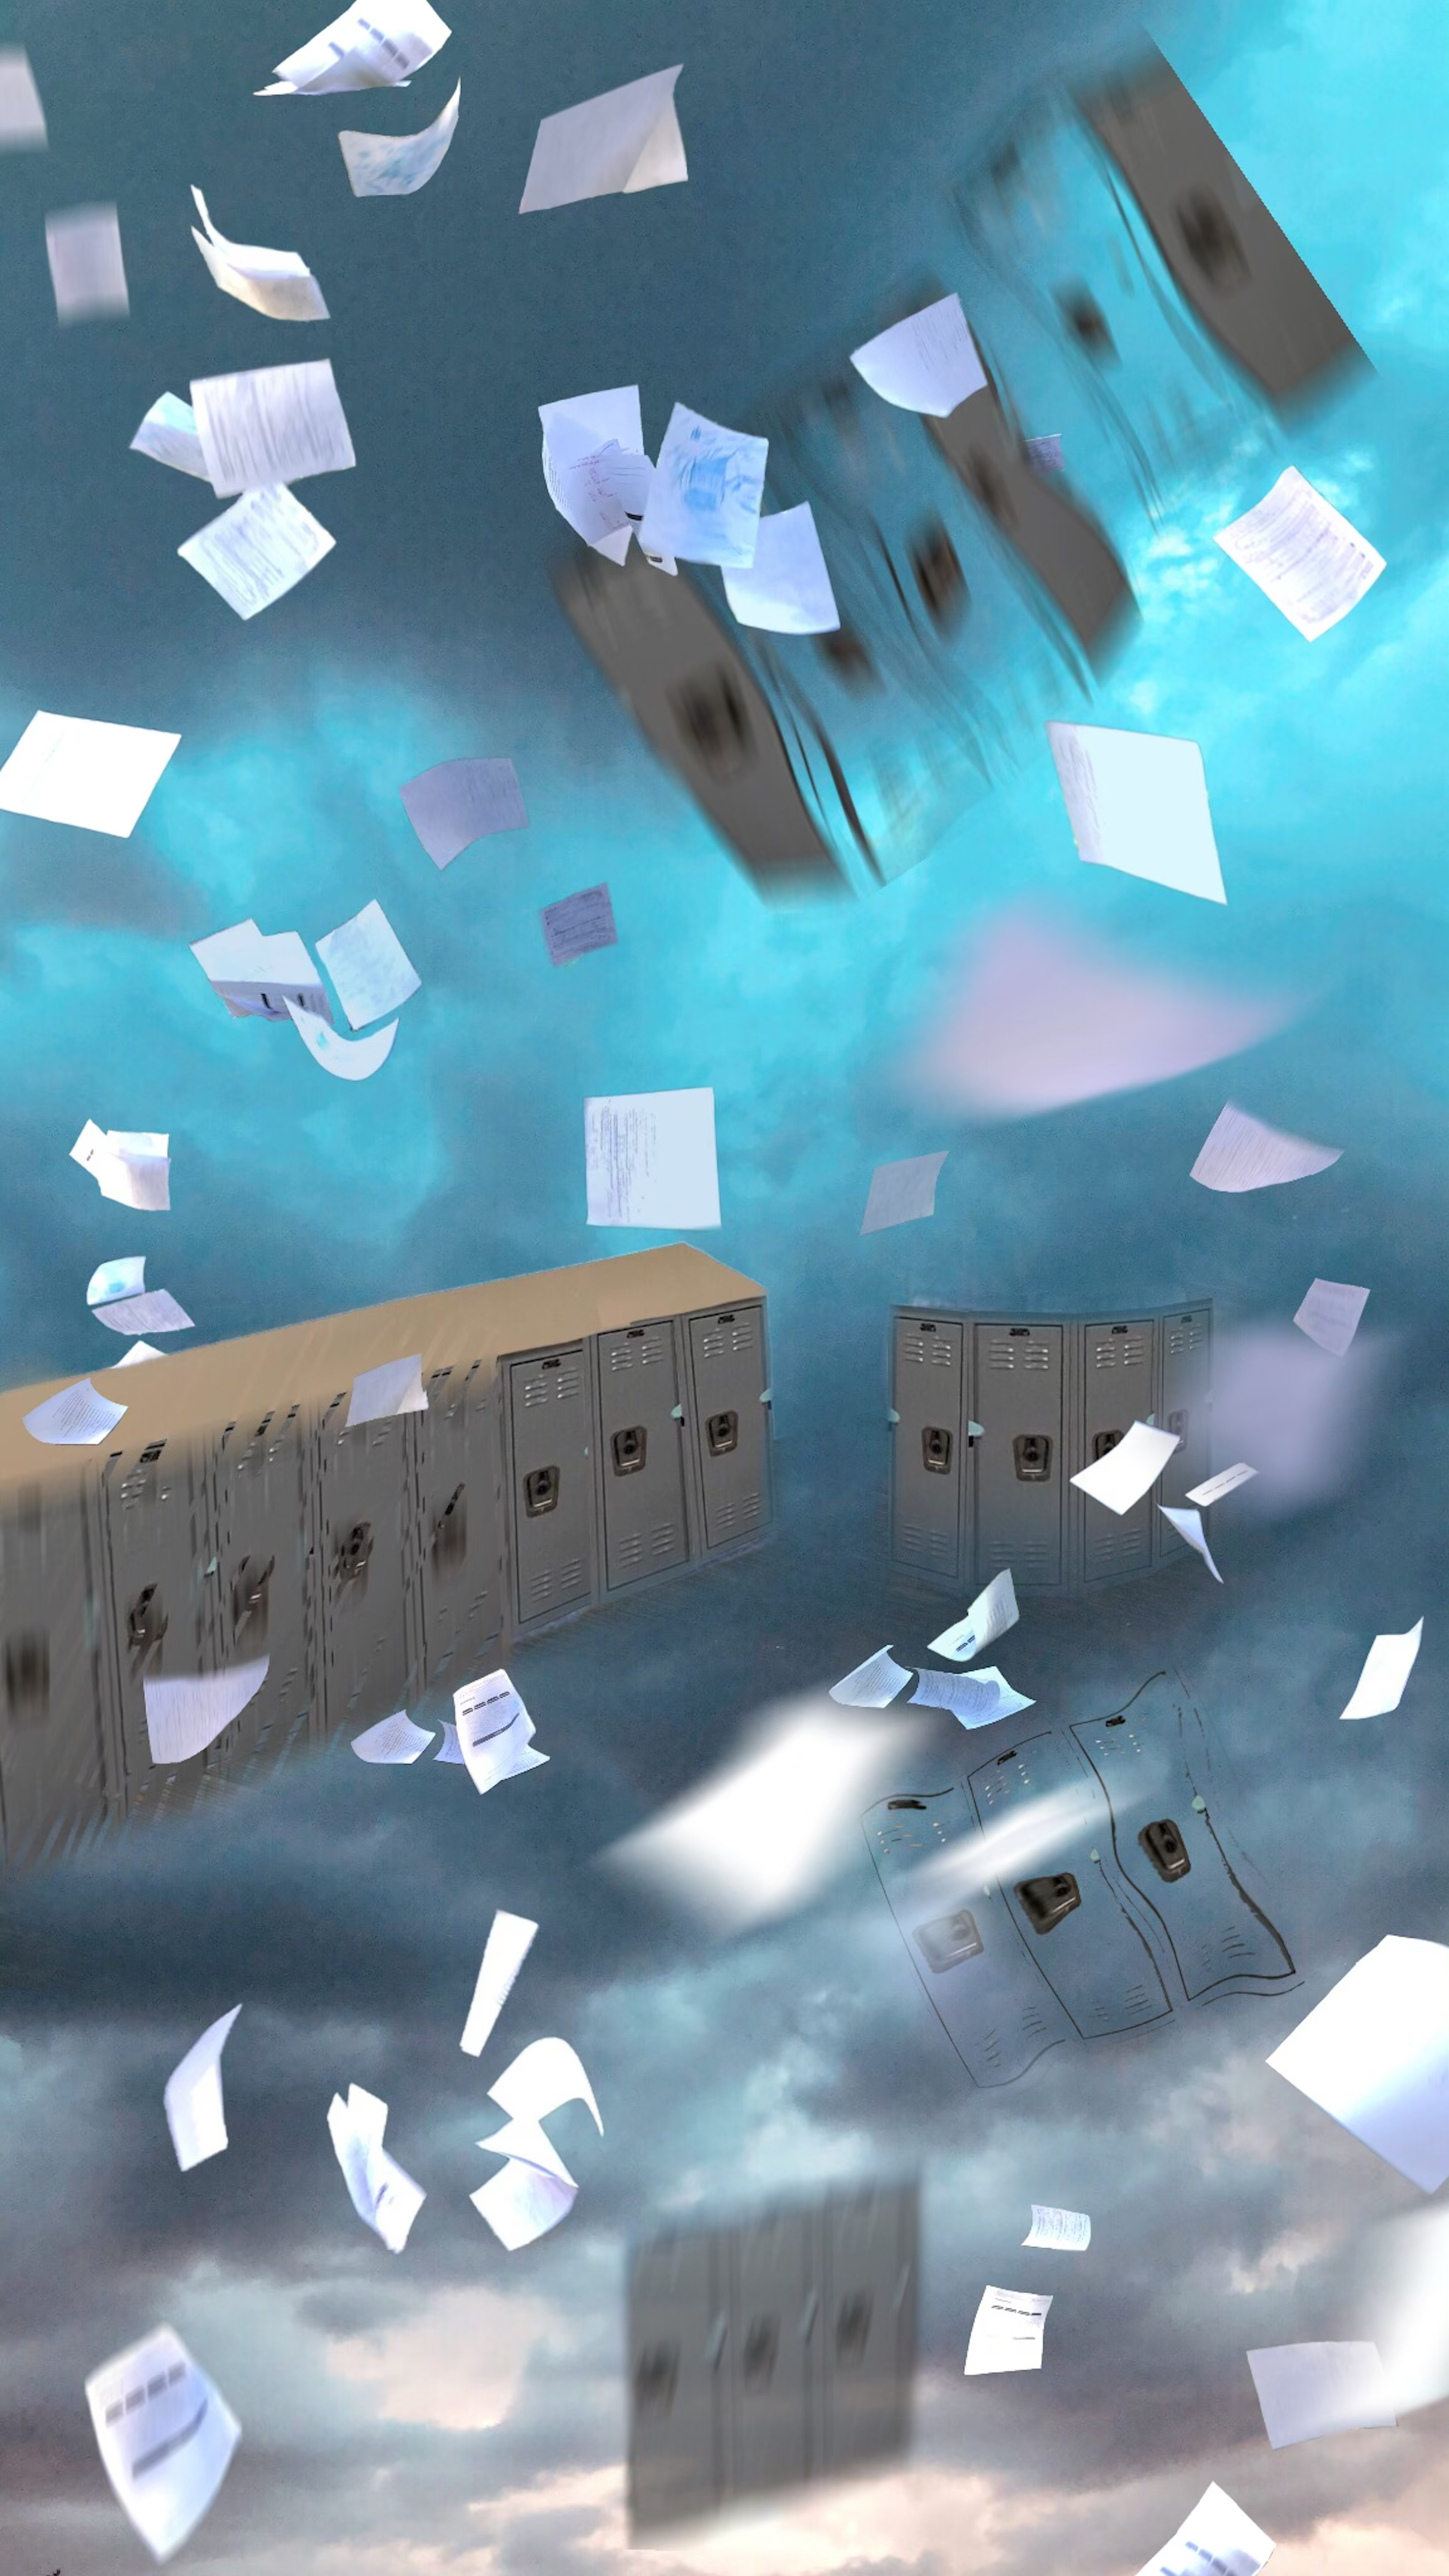 A blue-toned artwork of lockers and paper flying and crashing through a stormy sky.